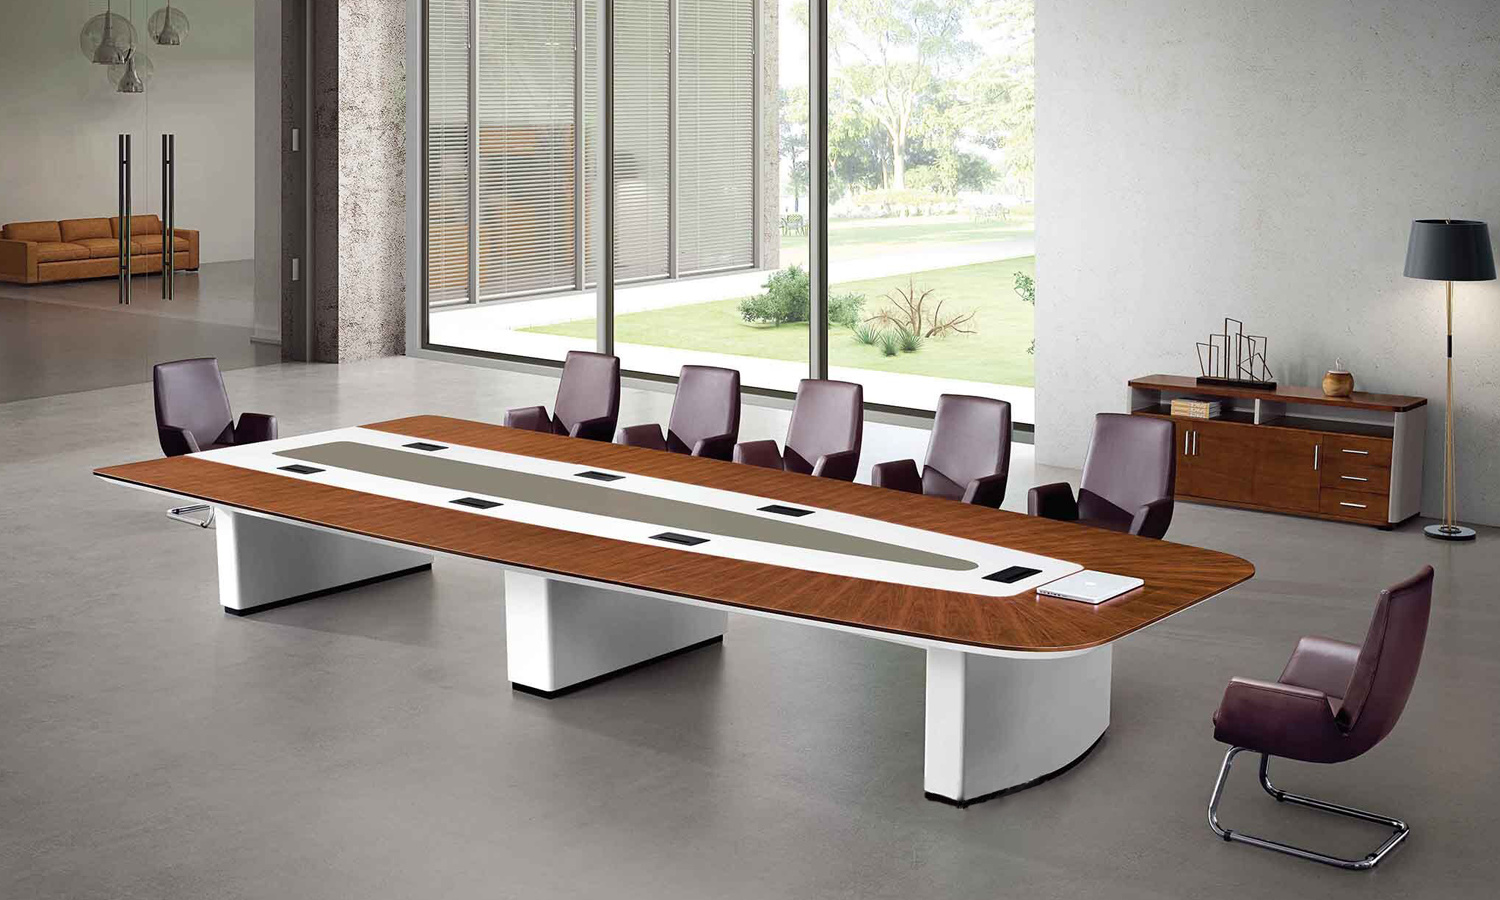  meeting table